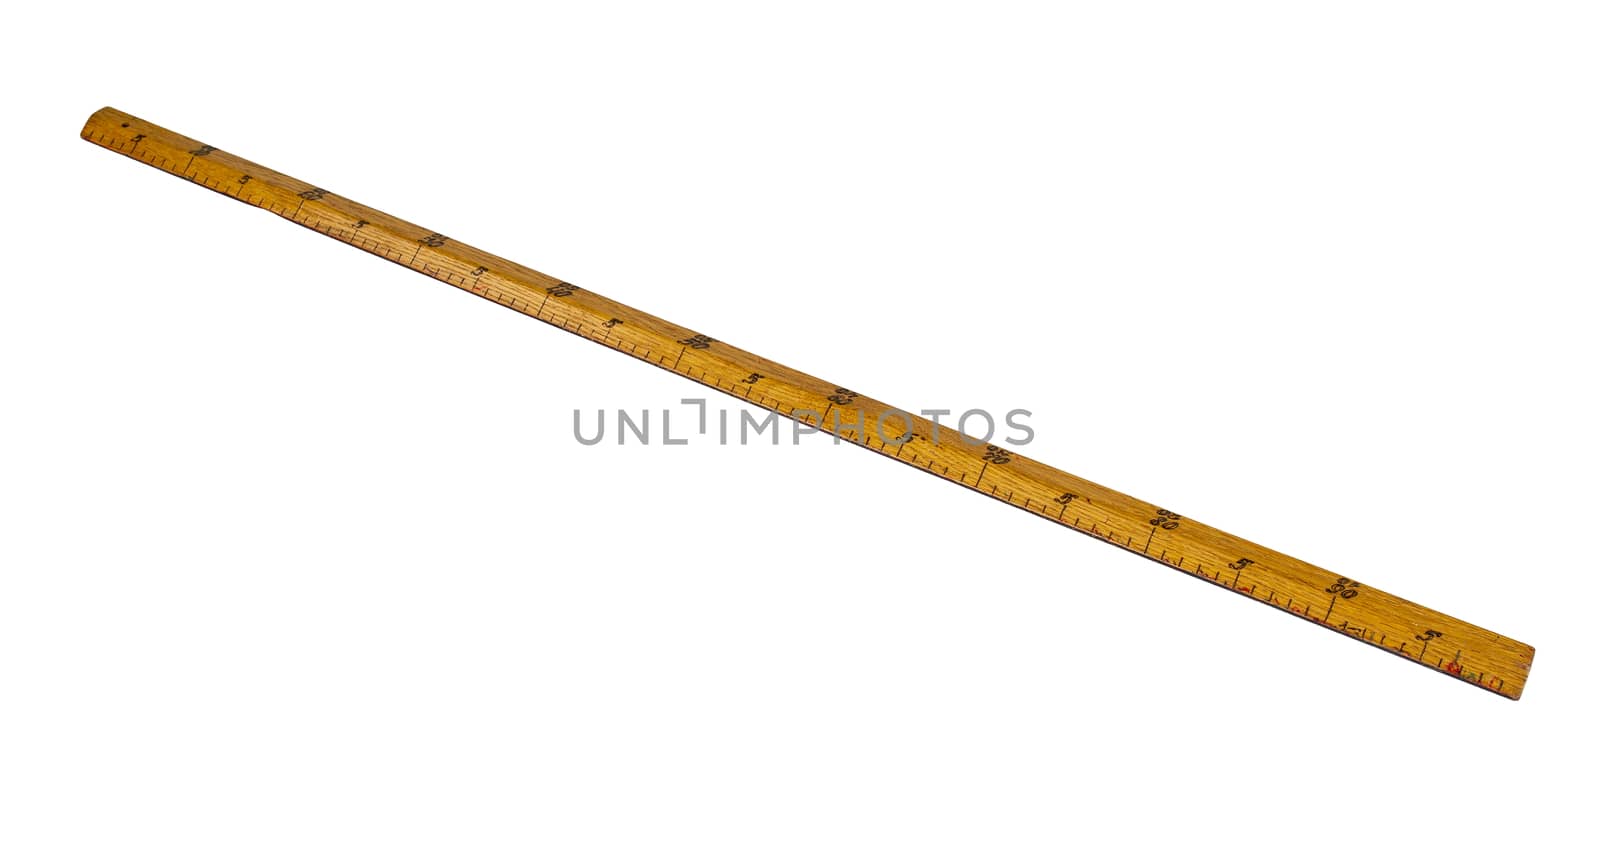 wooden meter ruler Handmade on a white background isolated.